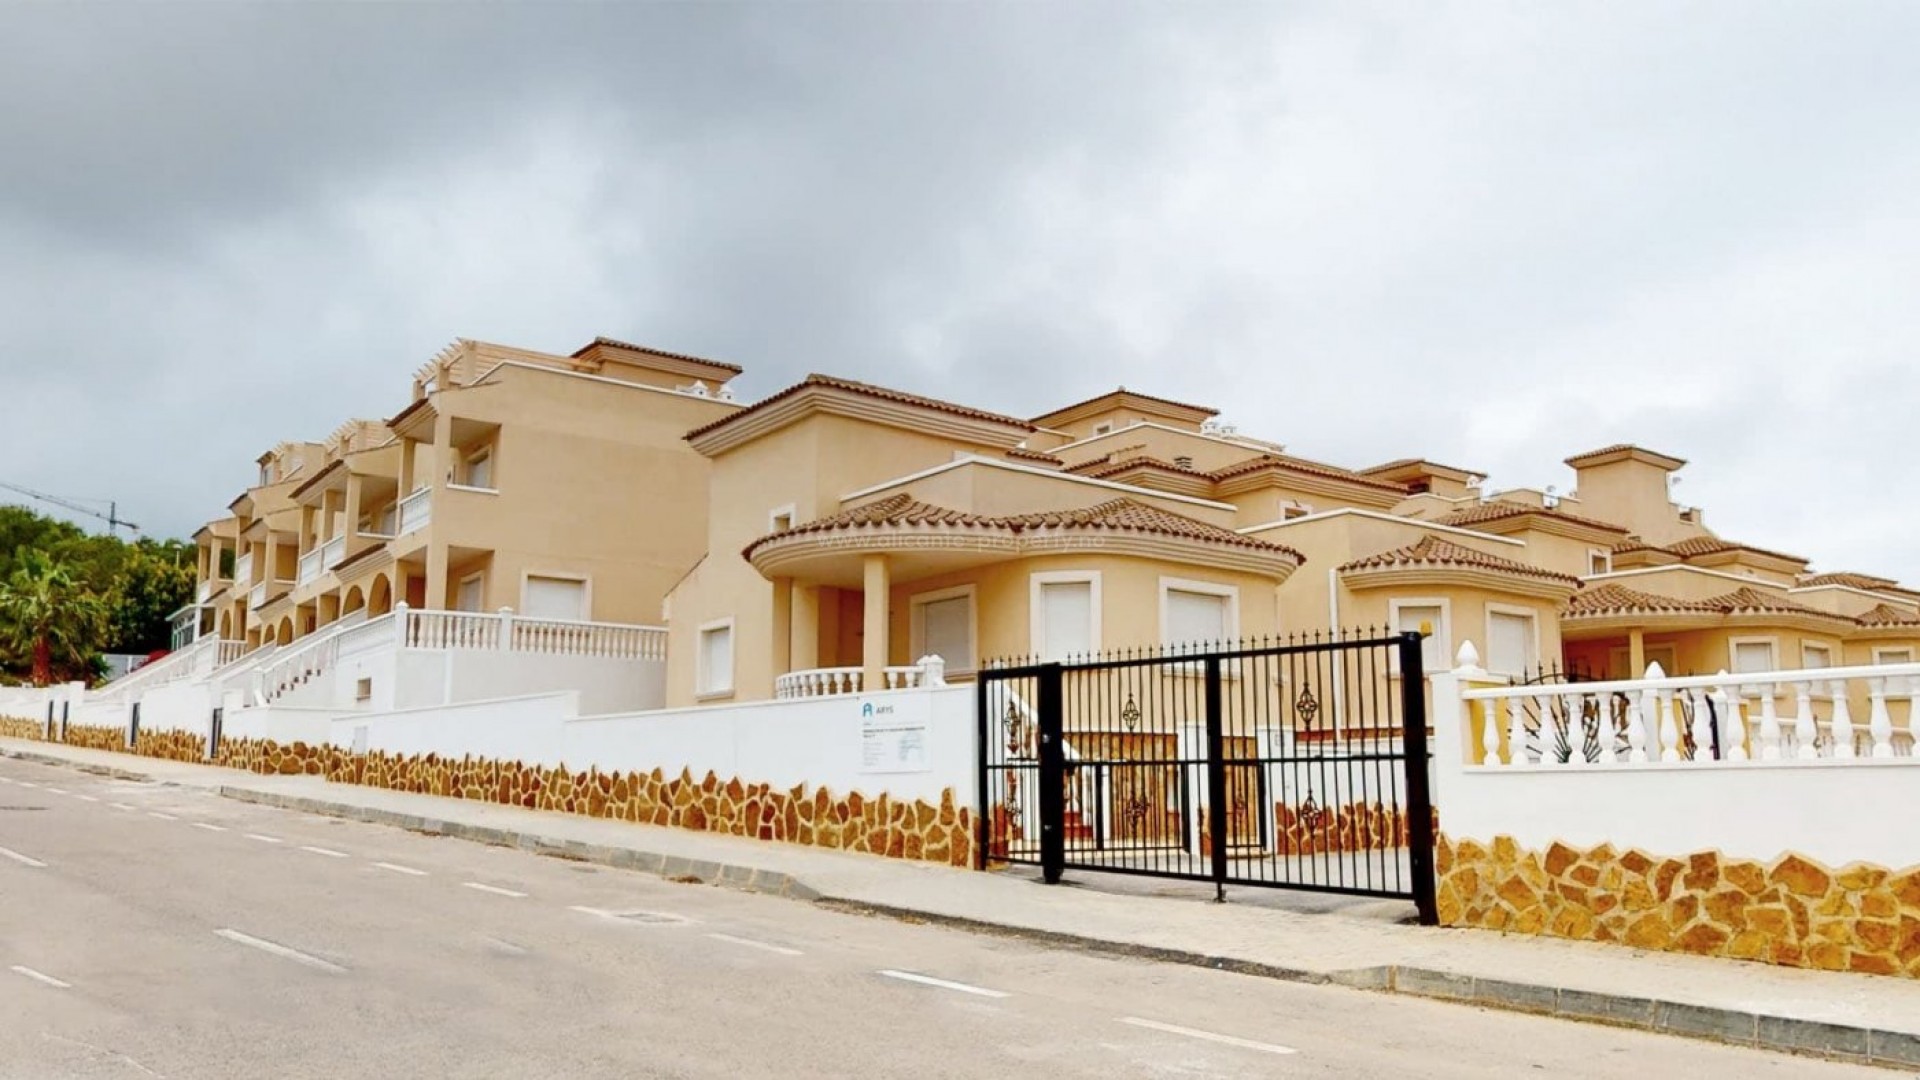 Turnkey villa/townhouse Cerro del Sol 6 km near Torrevieja, 3 bedrooms, 2 bathrooms, large gardens, private sun terraces and parking on the plots, communal pool